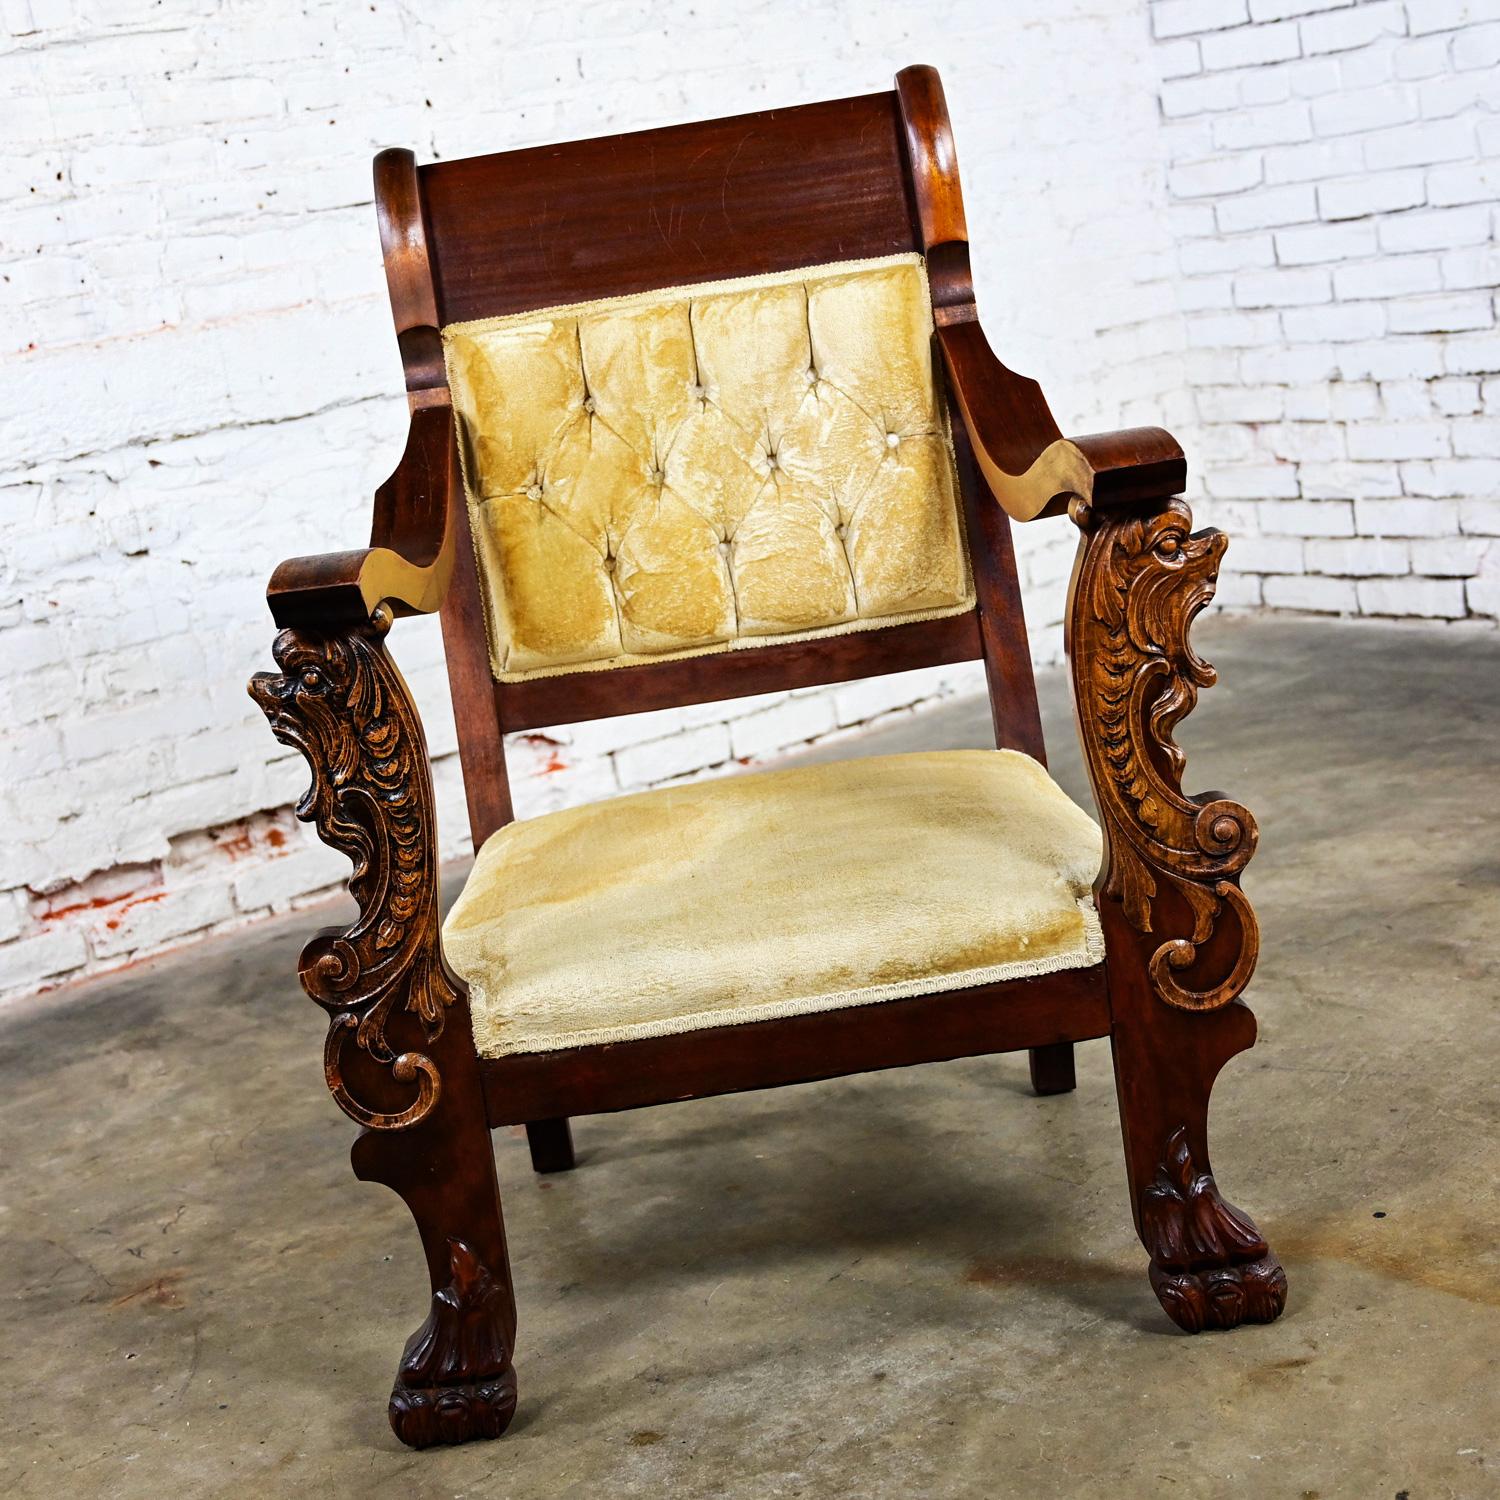 Fabulous Antique Victorian mahogany armchair with hand carved figural lion heads & claw feet. Vintage golden yellow velvet upholstery with gimp trim, sprung with Jute webbing, & coil springs. Beautiful condition, keeping in mind that this is vintage